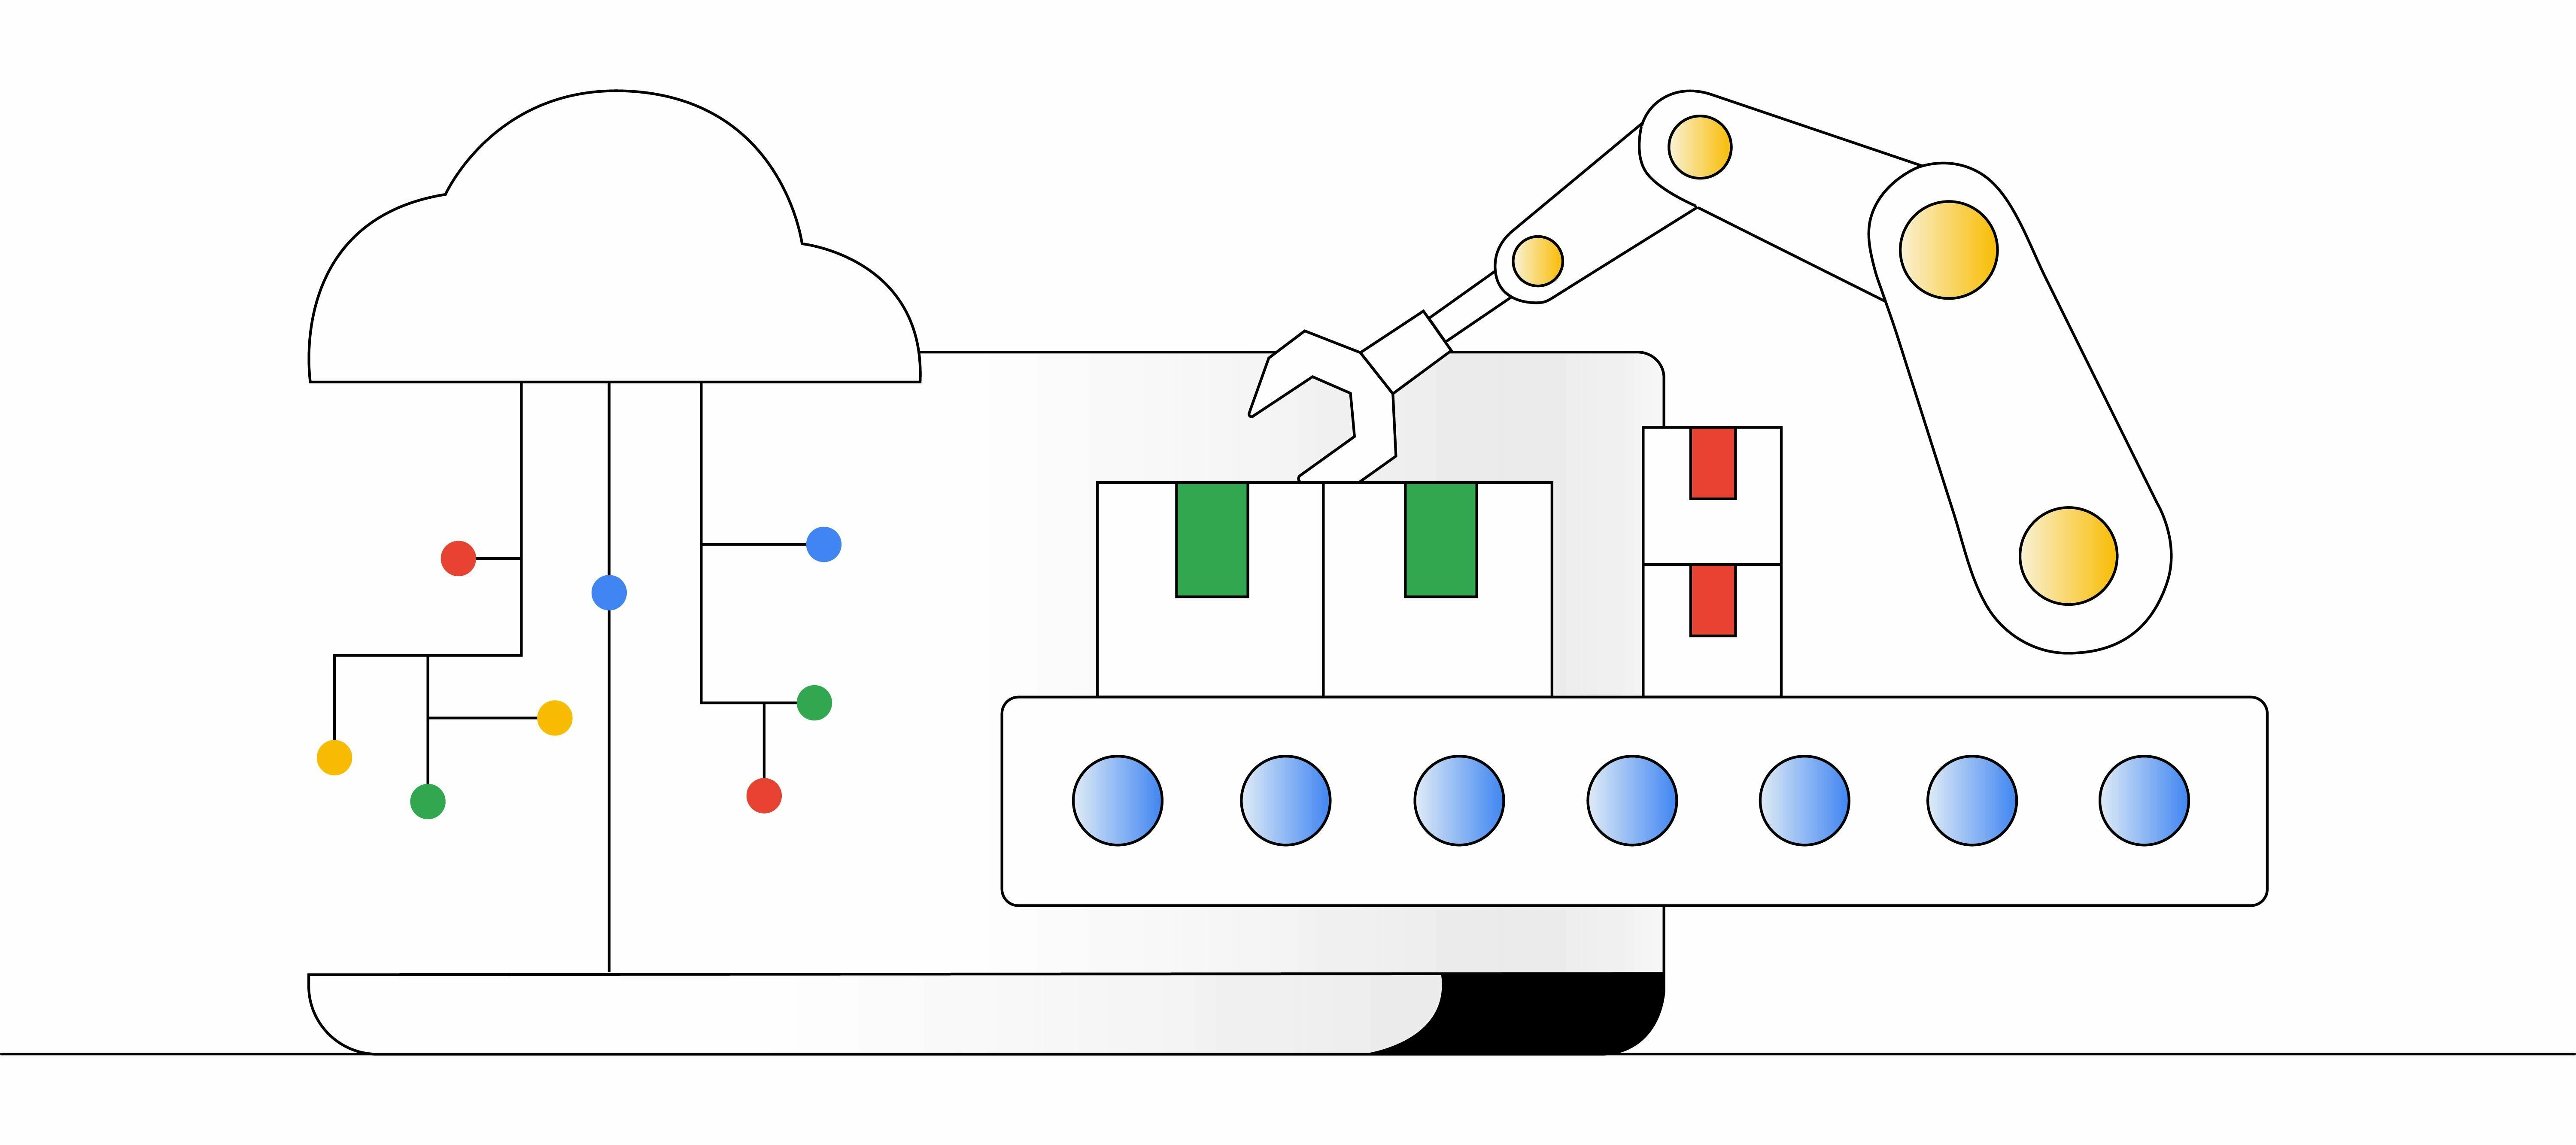 2022 Technology Trends in the Google Cloud Customer Community